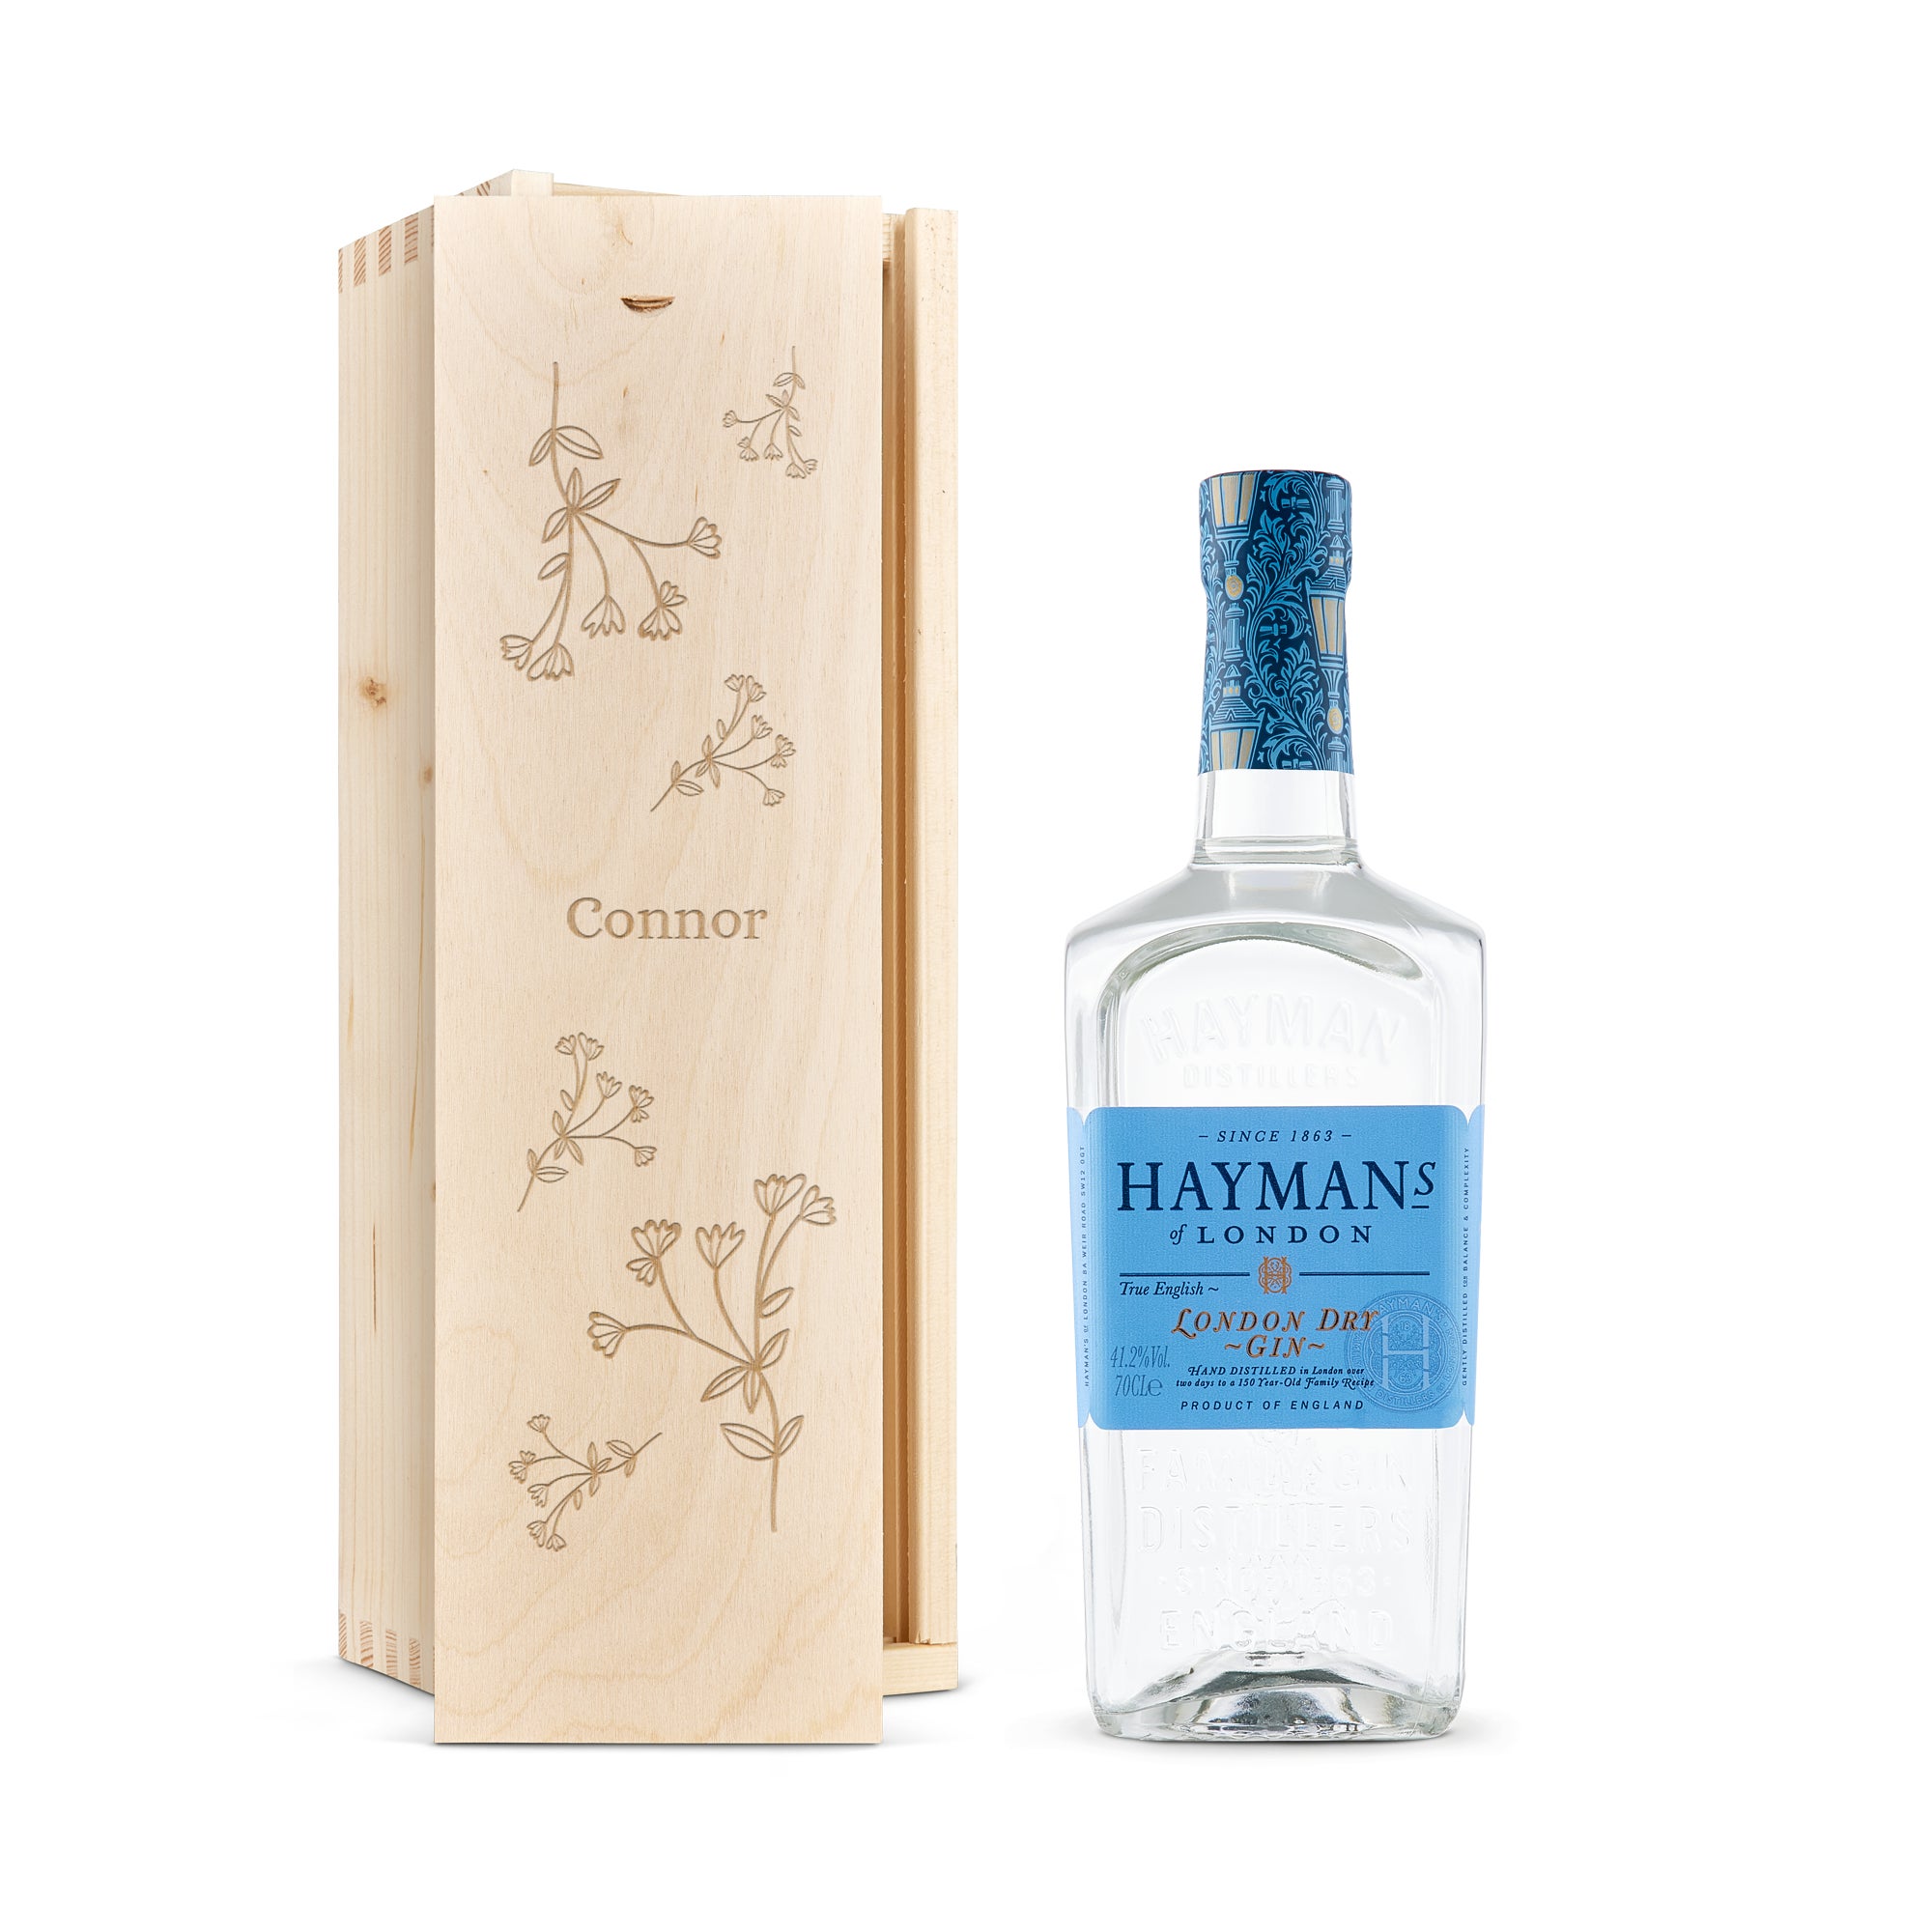 Personalised gin gift - Hayman's London Dry - Engraved wooden case